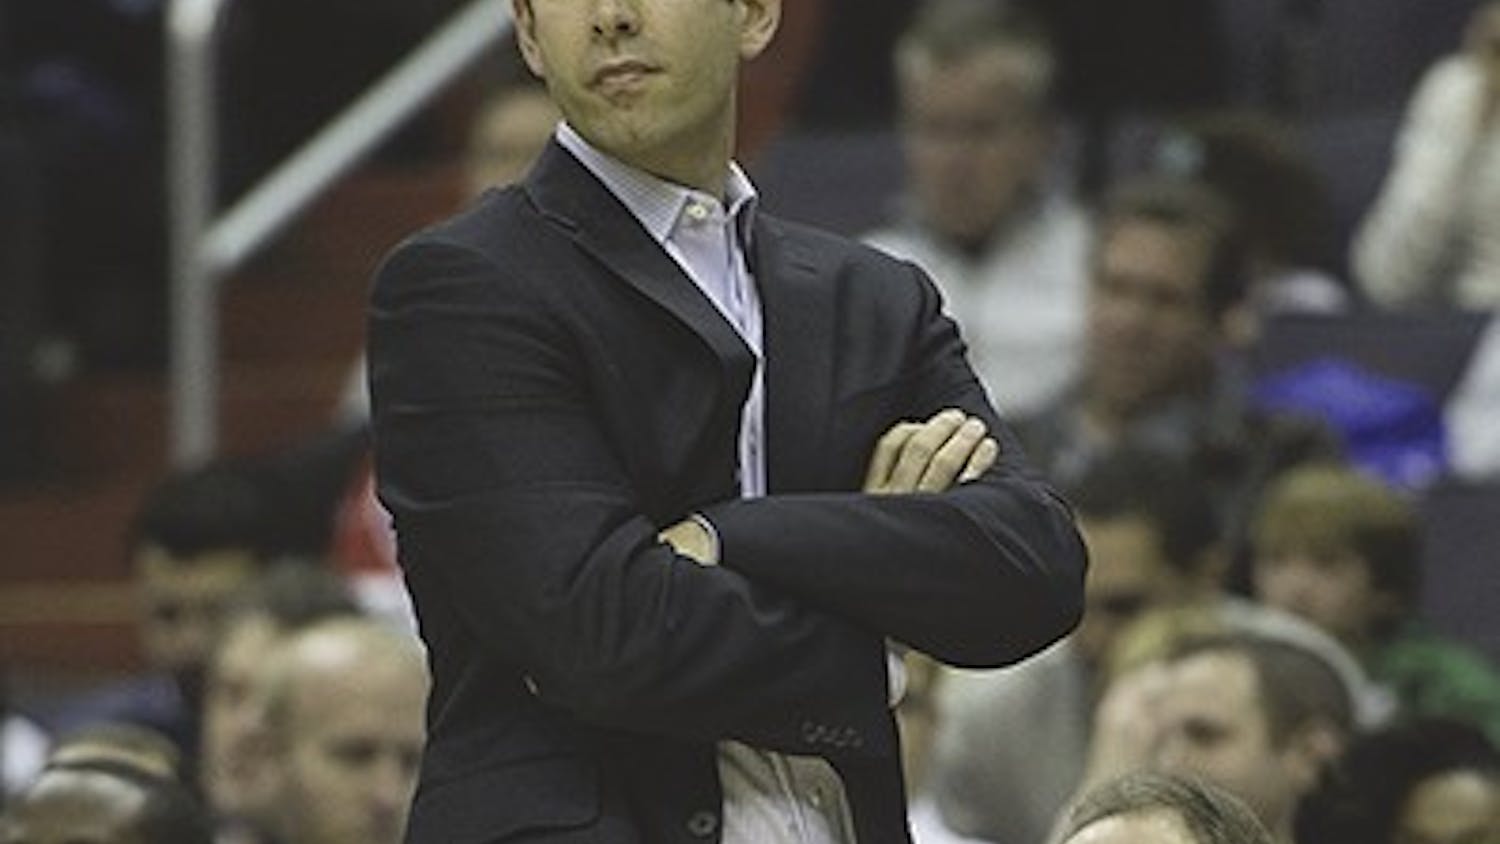 Boston Celtics head coach Brad Stevens on the side court  during the first half of their game against the Washington Wizards played at the Verizon Center in Washington, Wednesday, Jan. 22, 2014.  (Harry E. Walker/MCT)